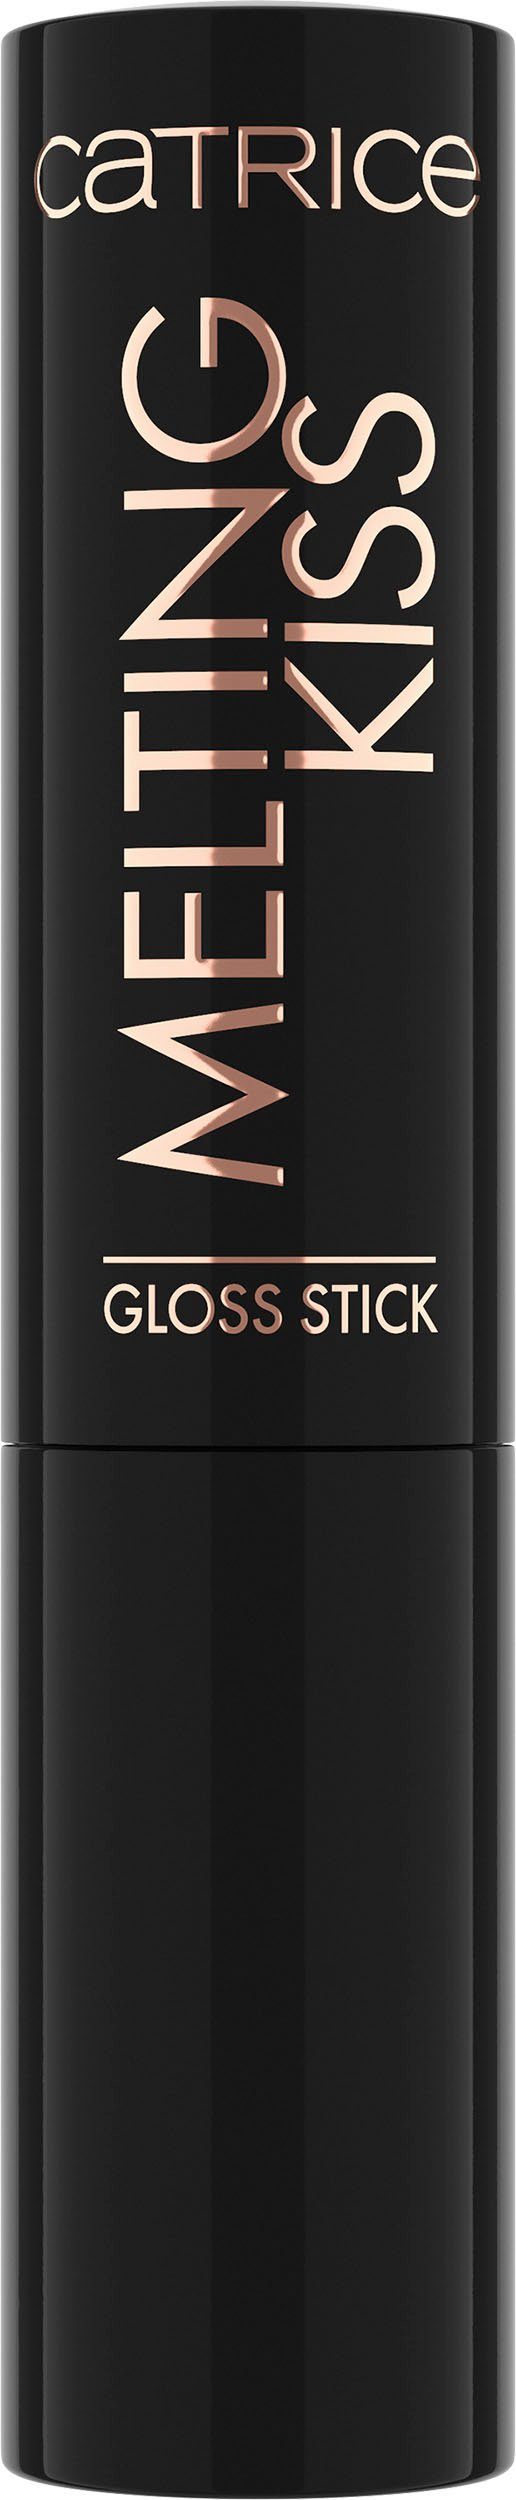 connection strong Gloss 3-tlg. Catrice Stick, Lippenstift Catrice Kiss Melting